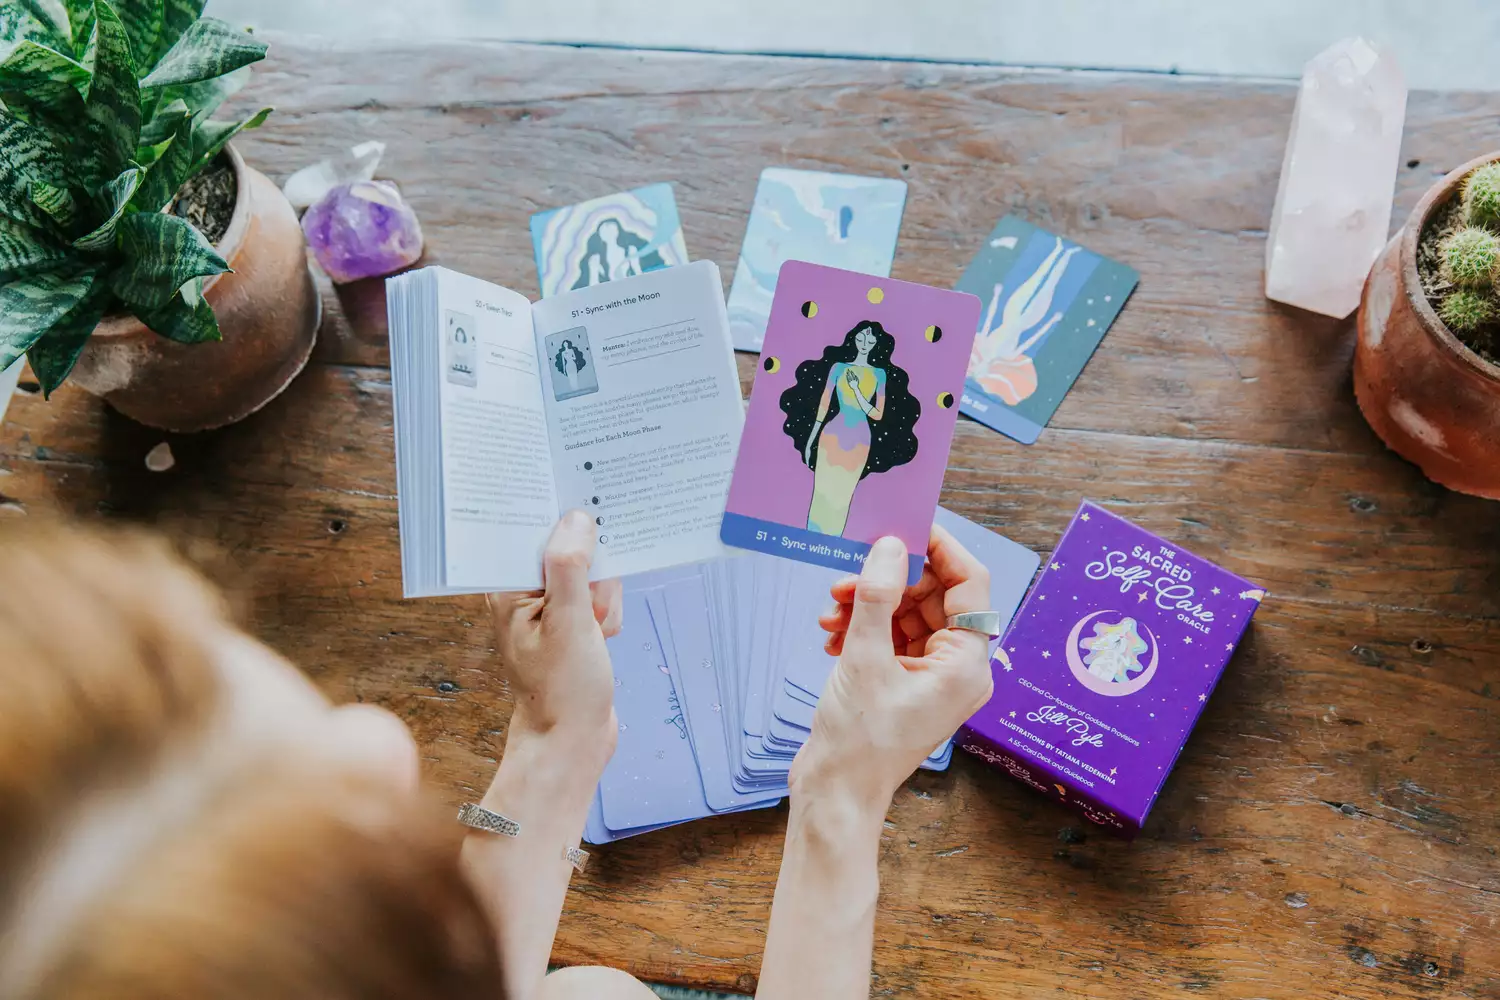 Goddess Provisions founder learning the meanings of each card in her tarot deck.